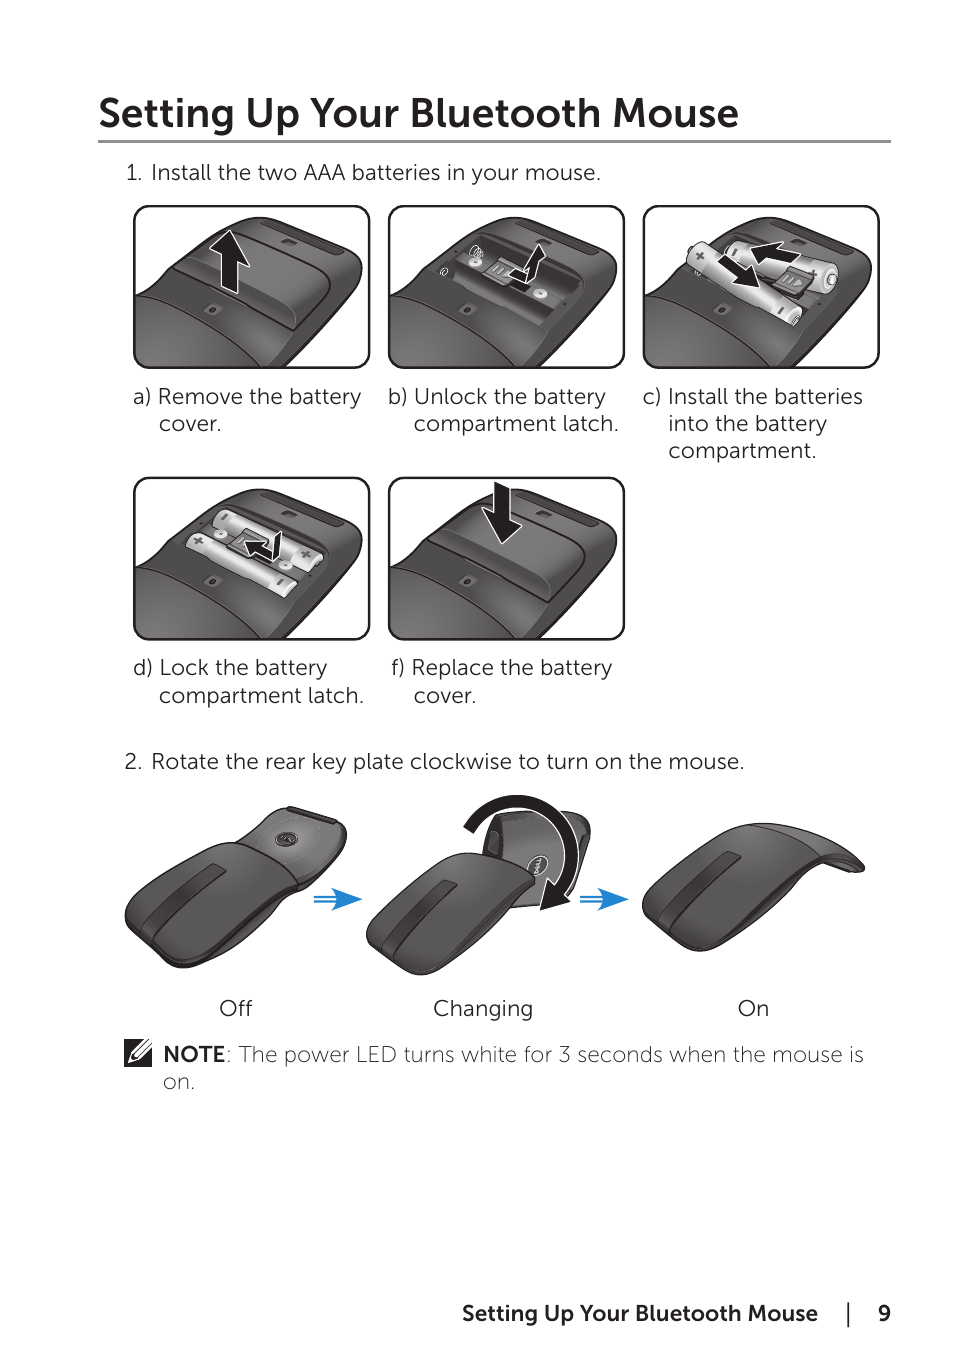 Setting up your bluetooth mouse | Dell Bluetooth Mouse WM615 User Manual |  Page 9 / 23